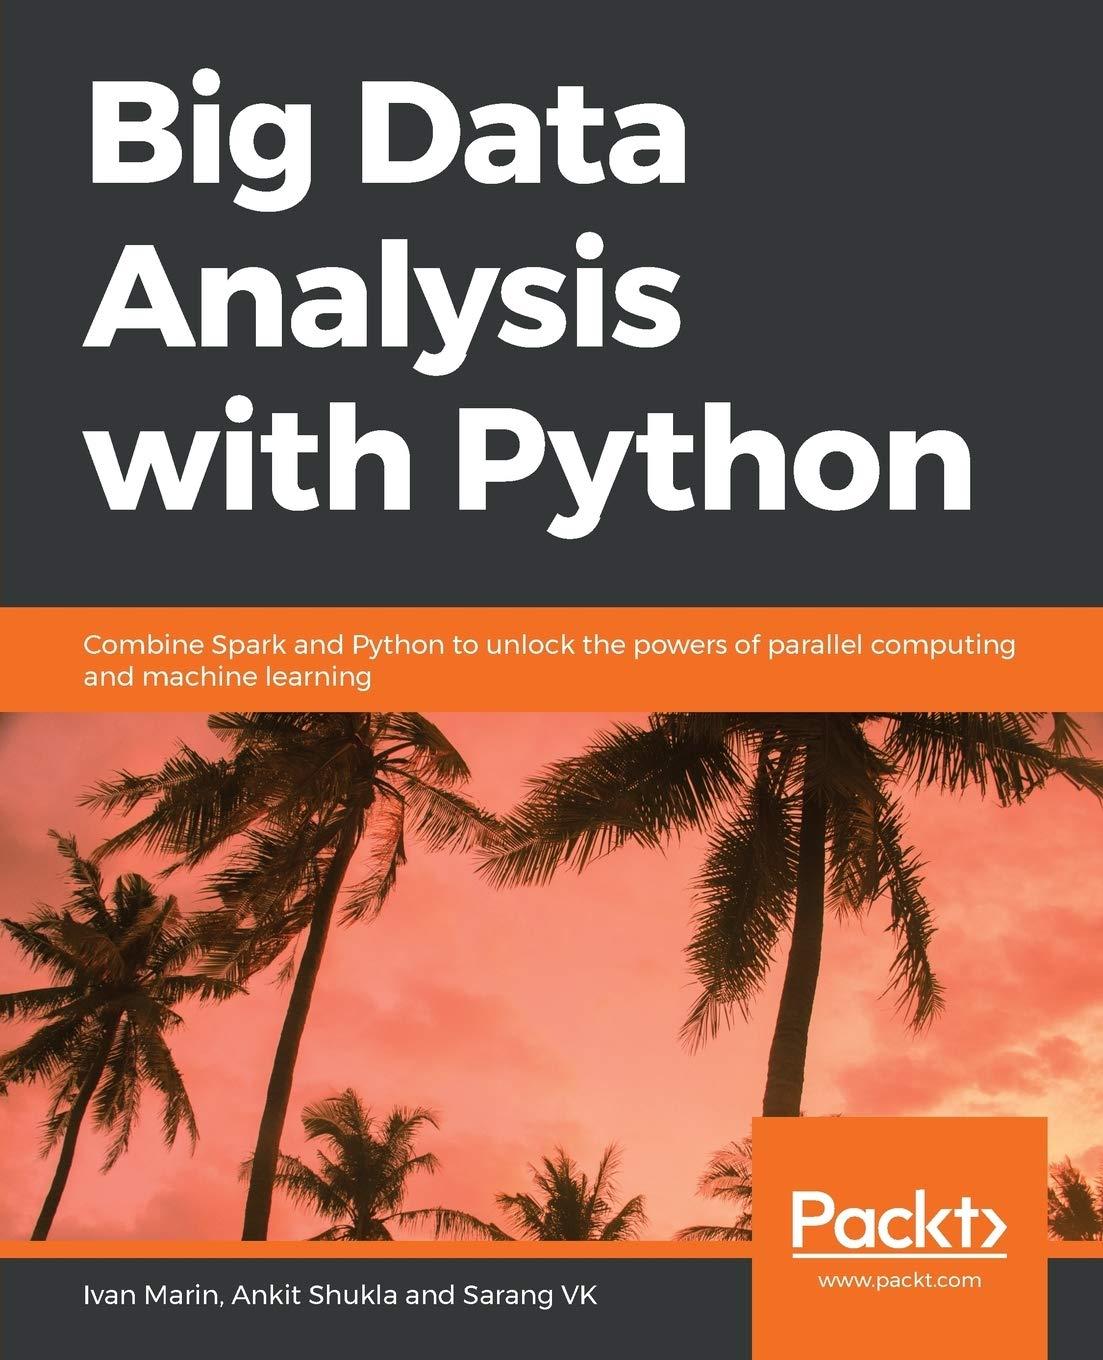 big data analysis with python combine spark and python to unlock the powers of parallel computing and machine